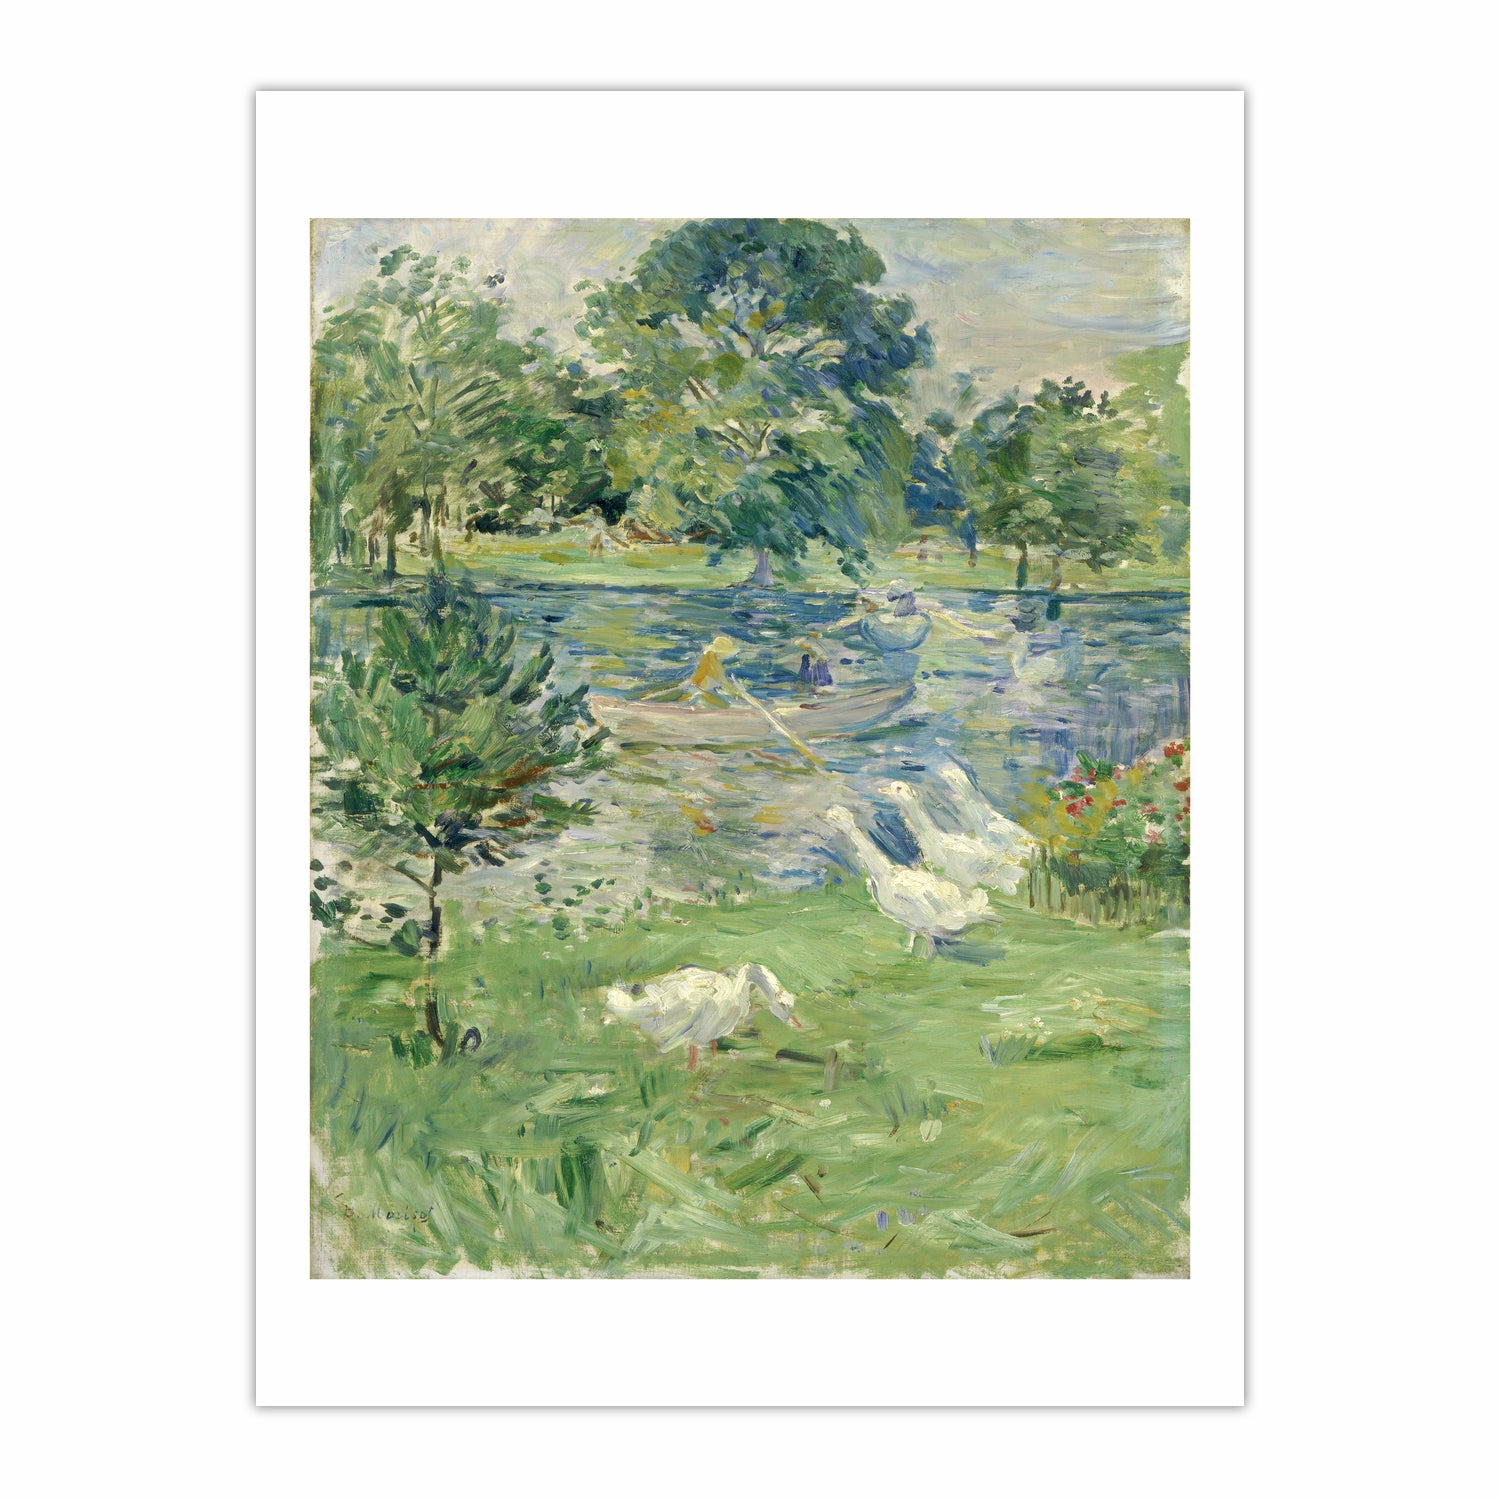 Girl in a Boat with Geese